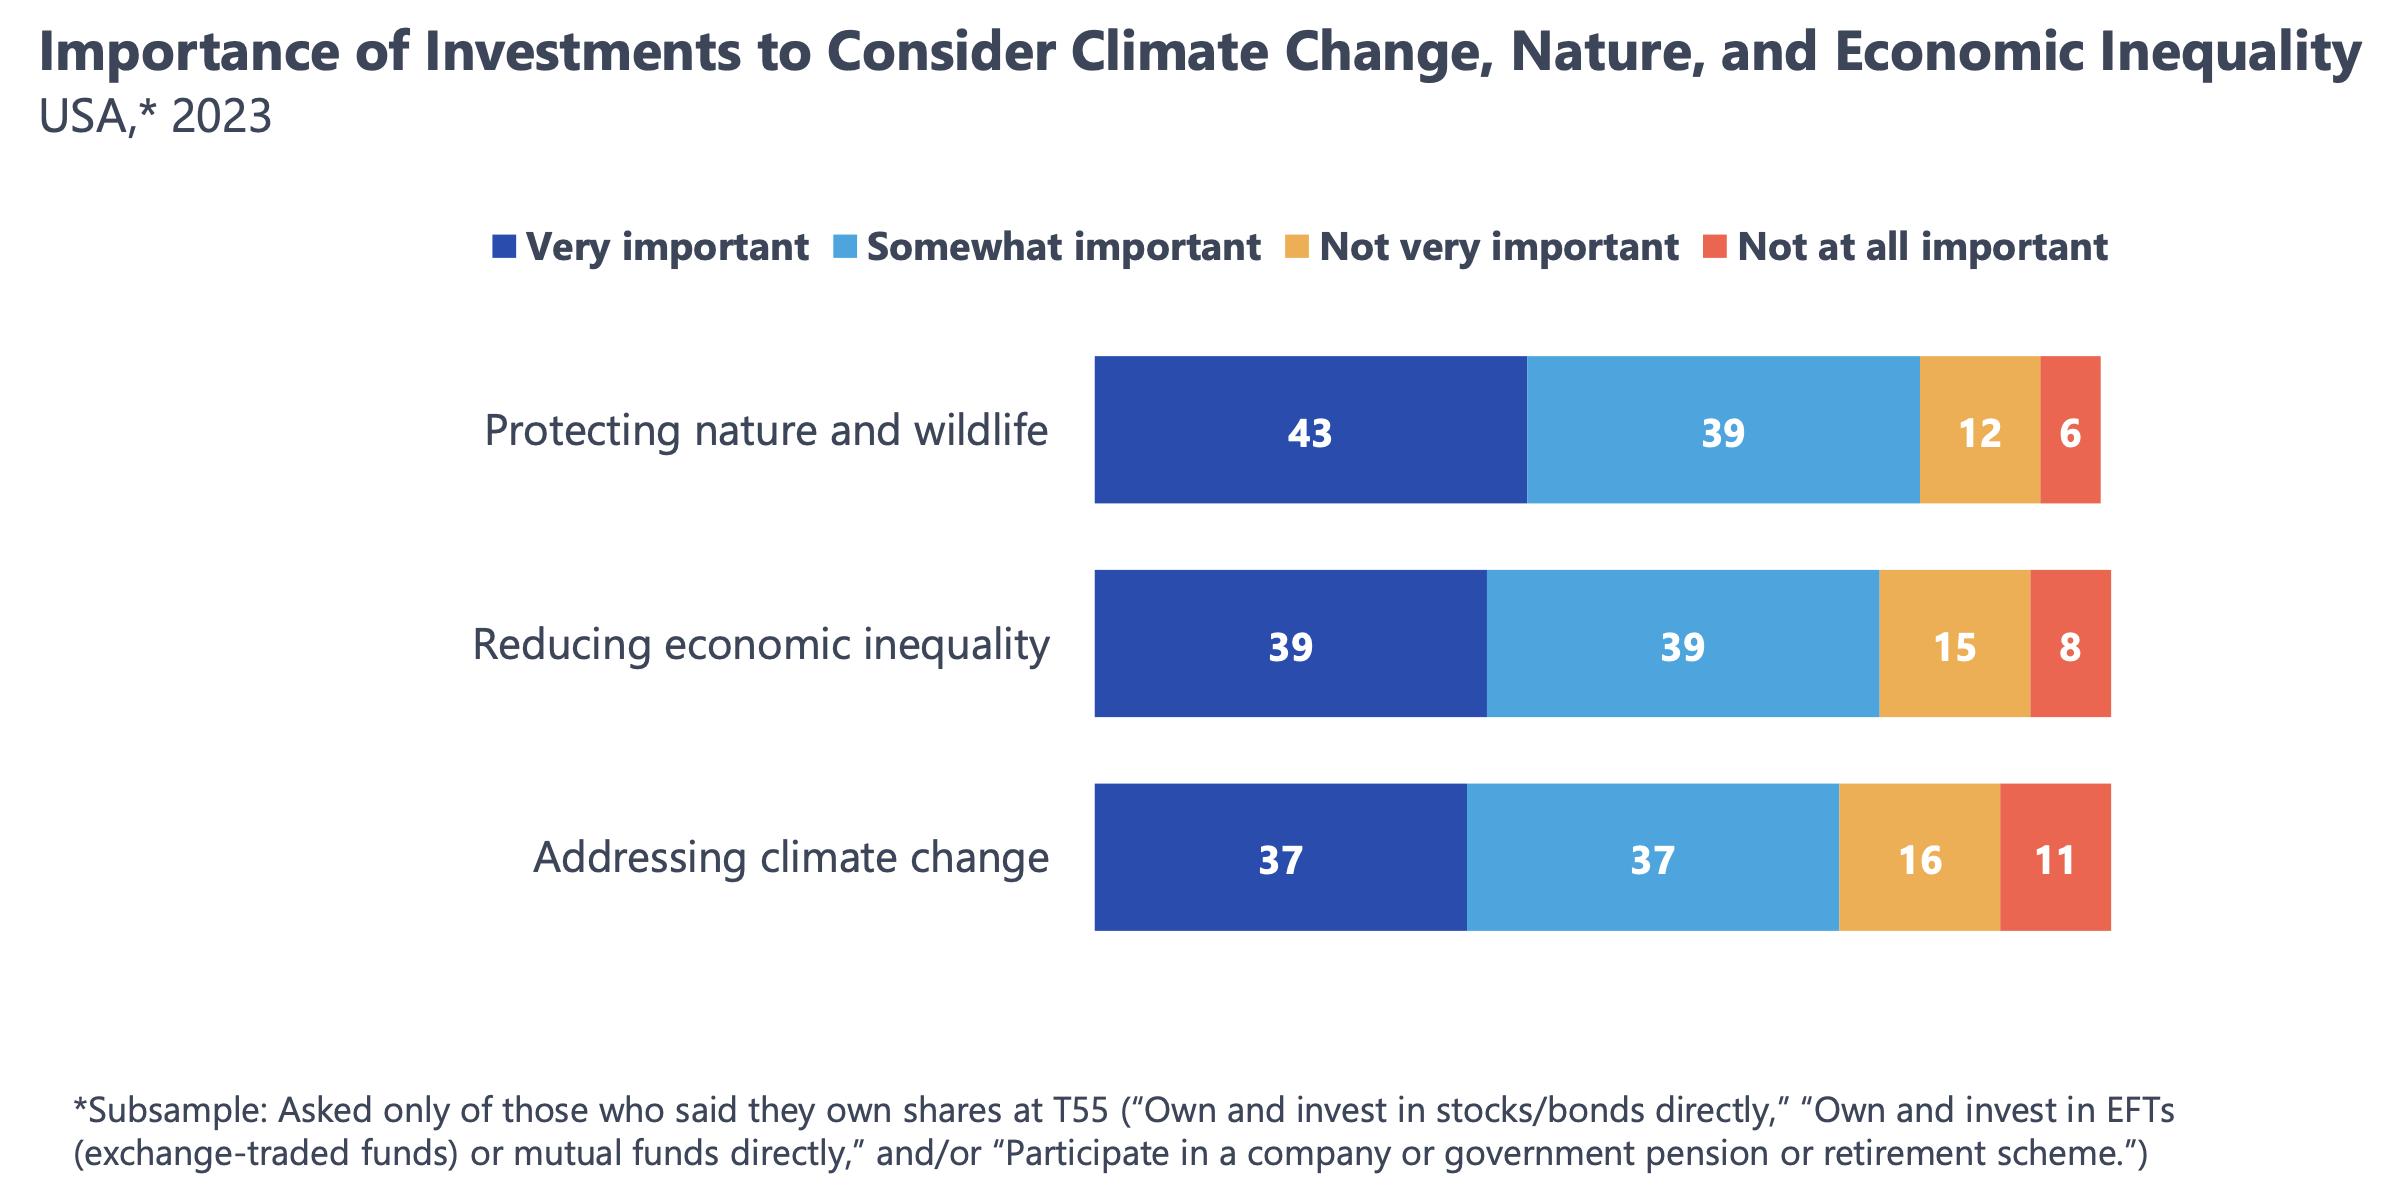 Interest in sustainability among US investors